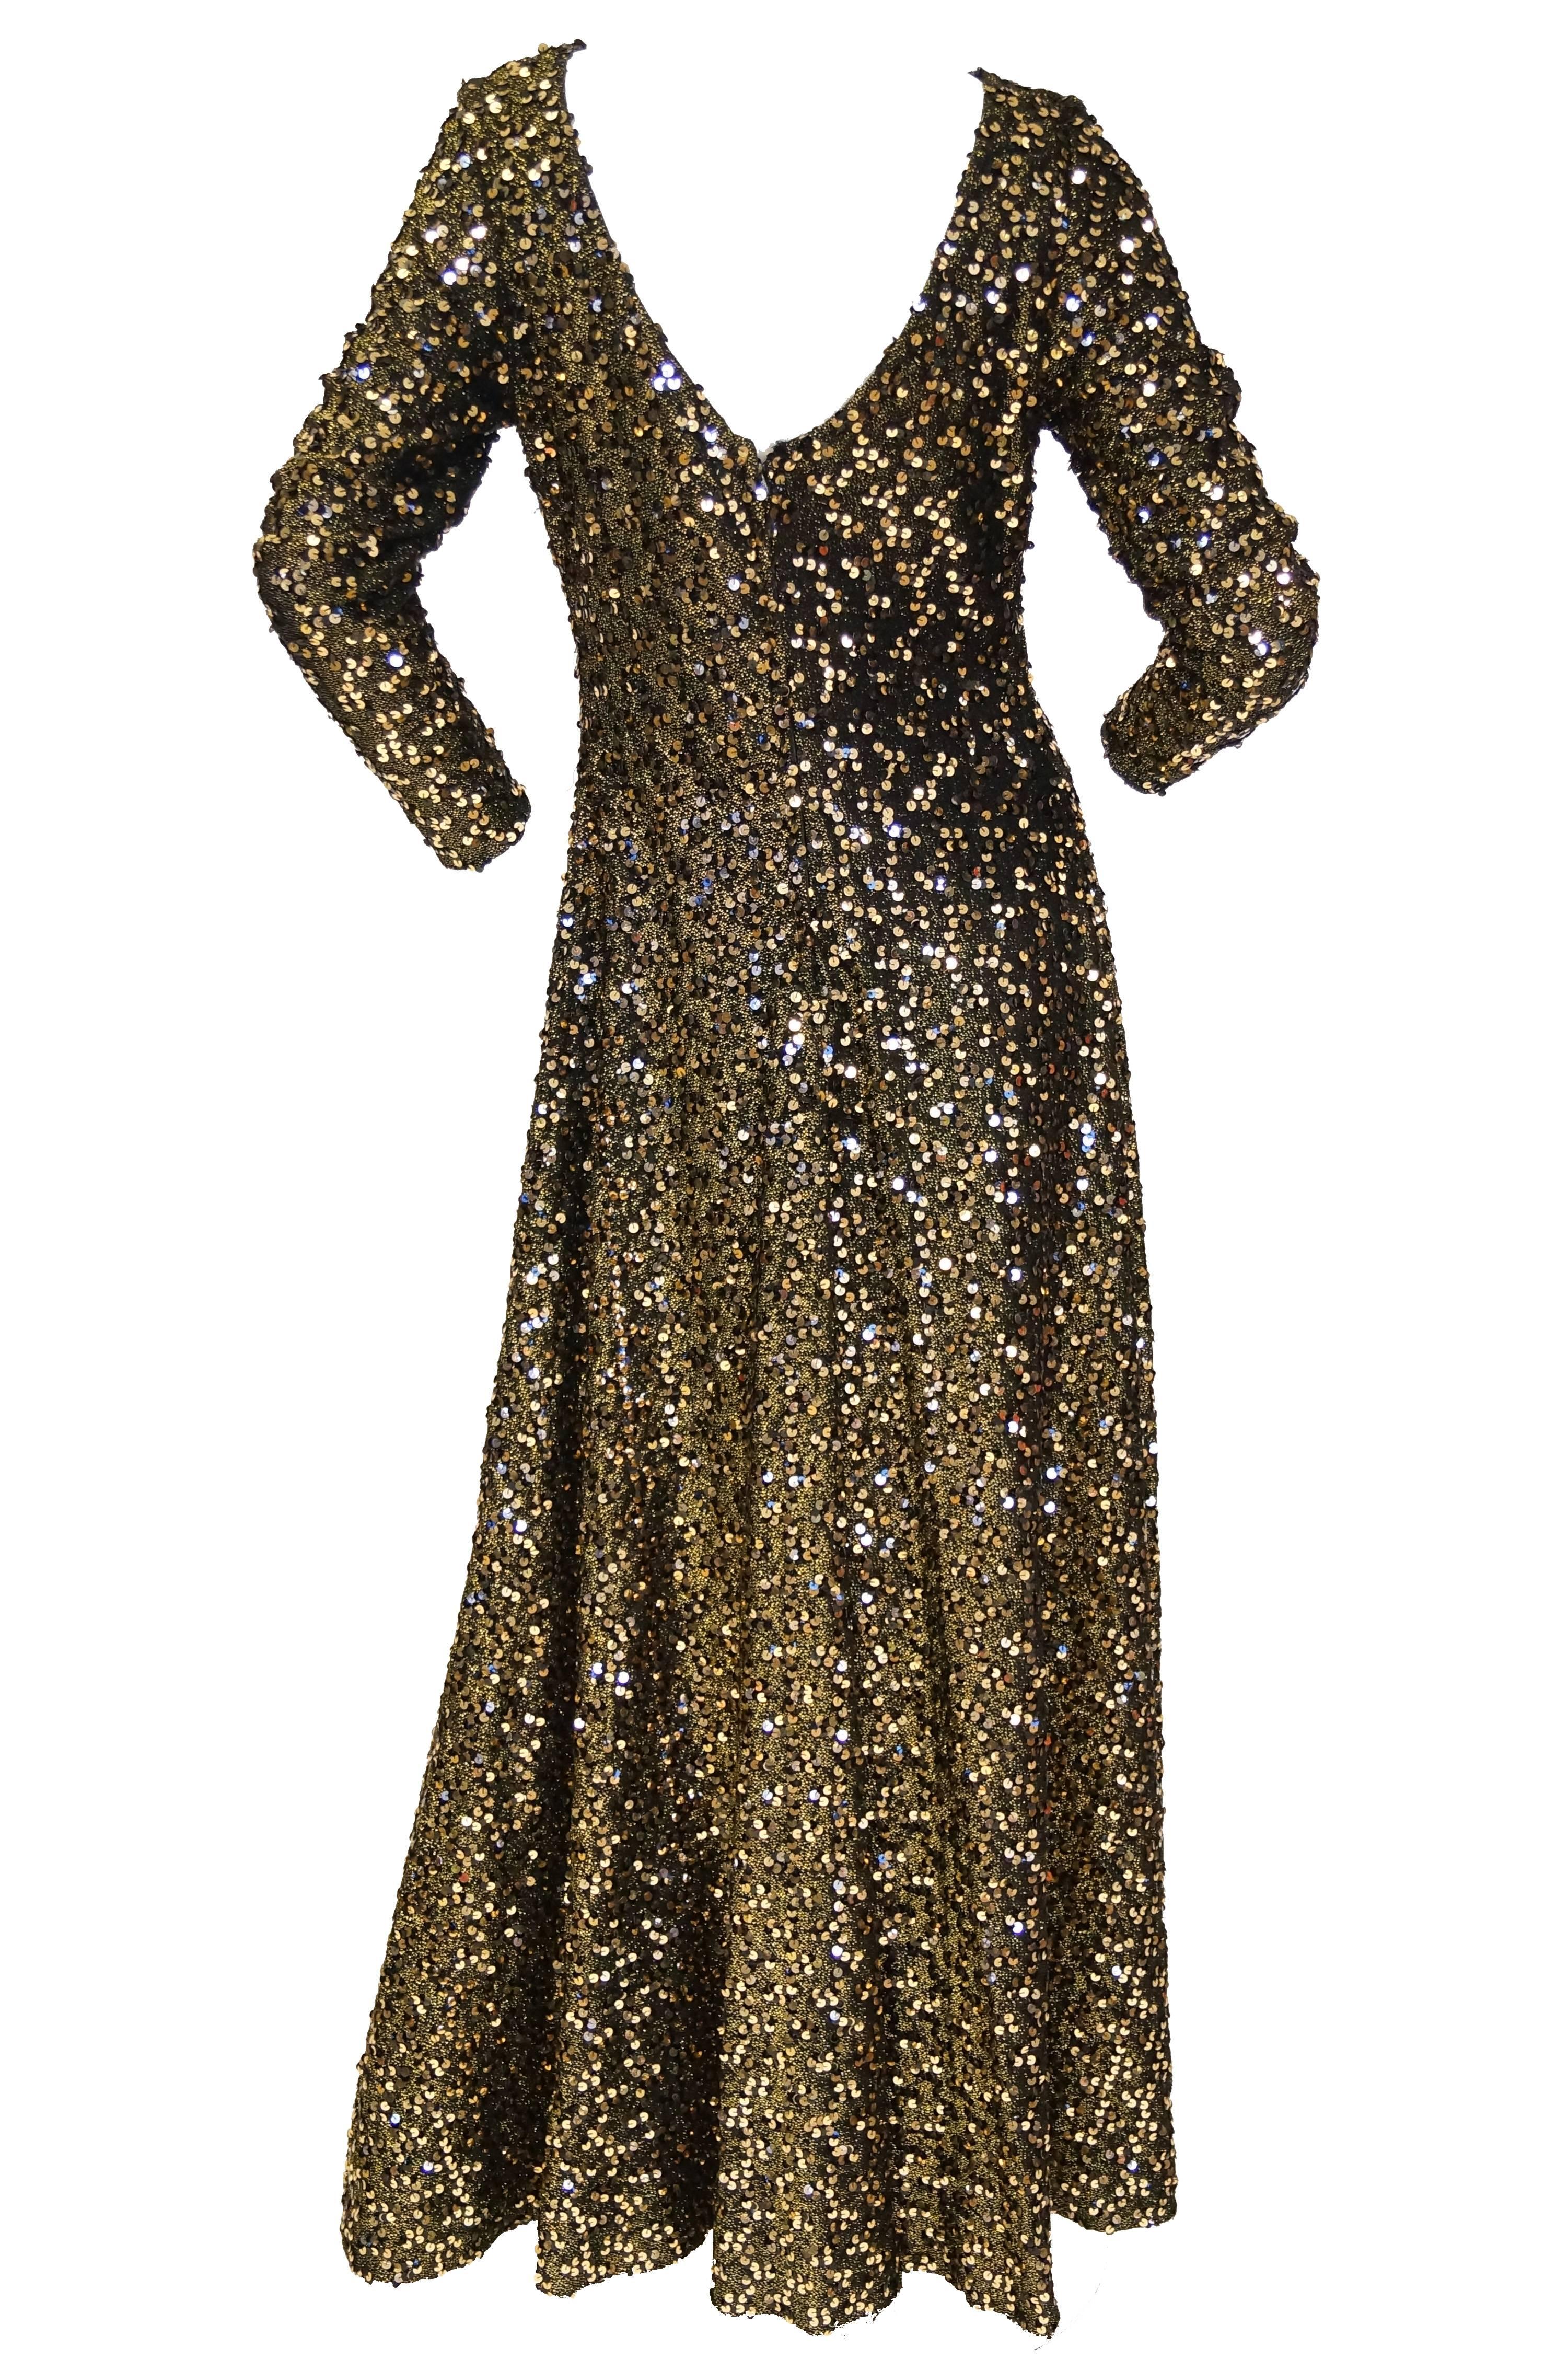 Floor length maxi black and gold sequin evening dress by Jill Richards. The dress has long sleeves, a loose waist and voluminous skirt that pools slightly at the bottom. The dress has a low back that reaches mid back. The fabulous, elegant dress is